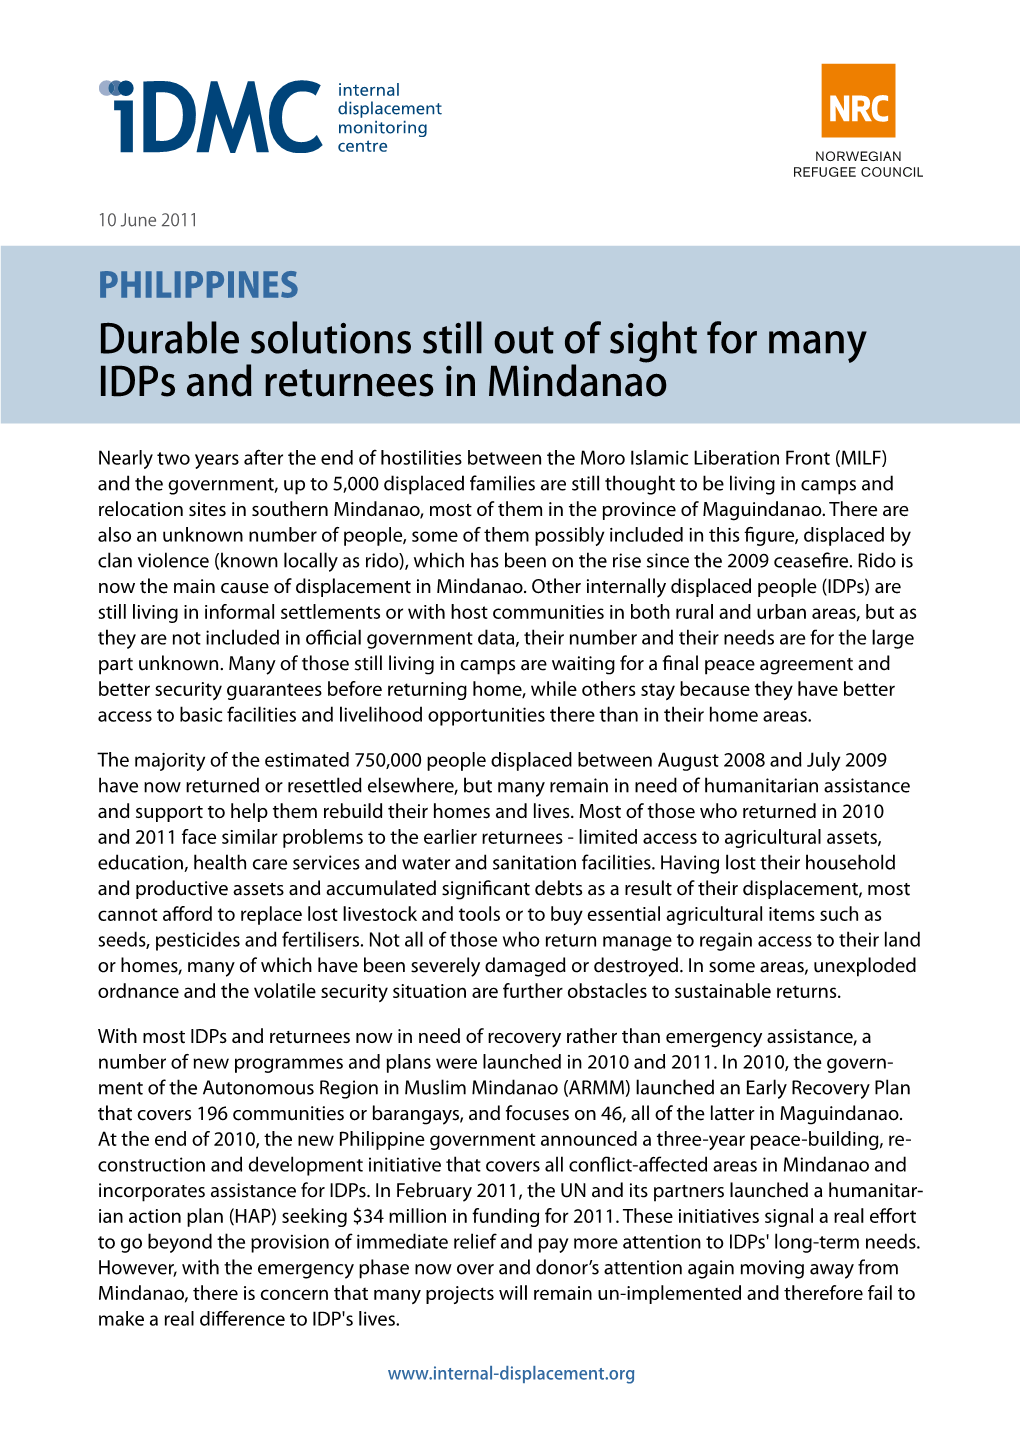 Philippines: Durable Solutions Still out of Sight for Many Idps and Returnees in Mindanao